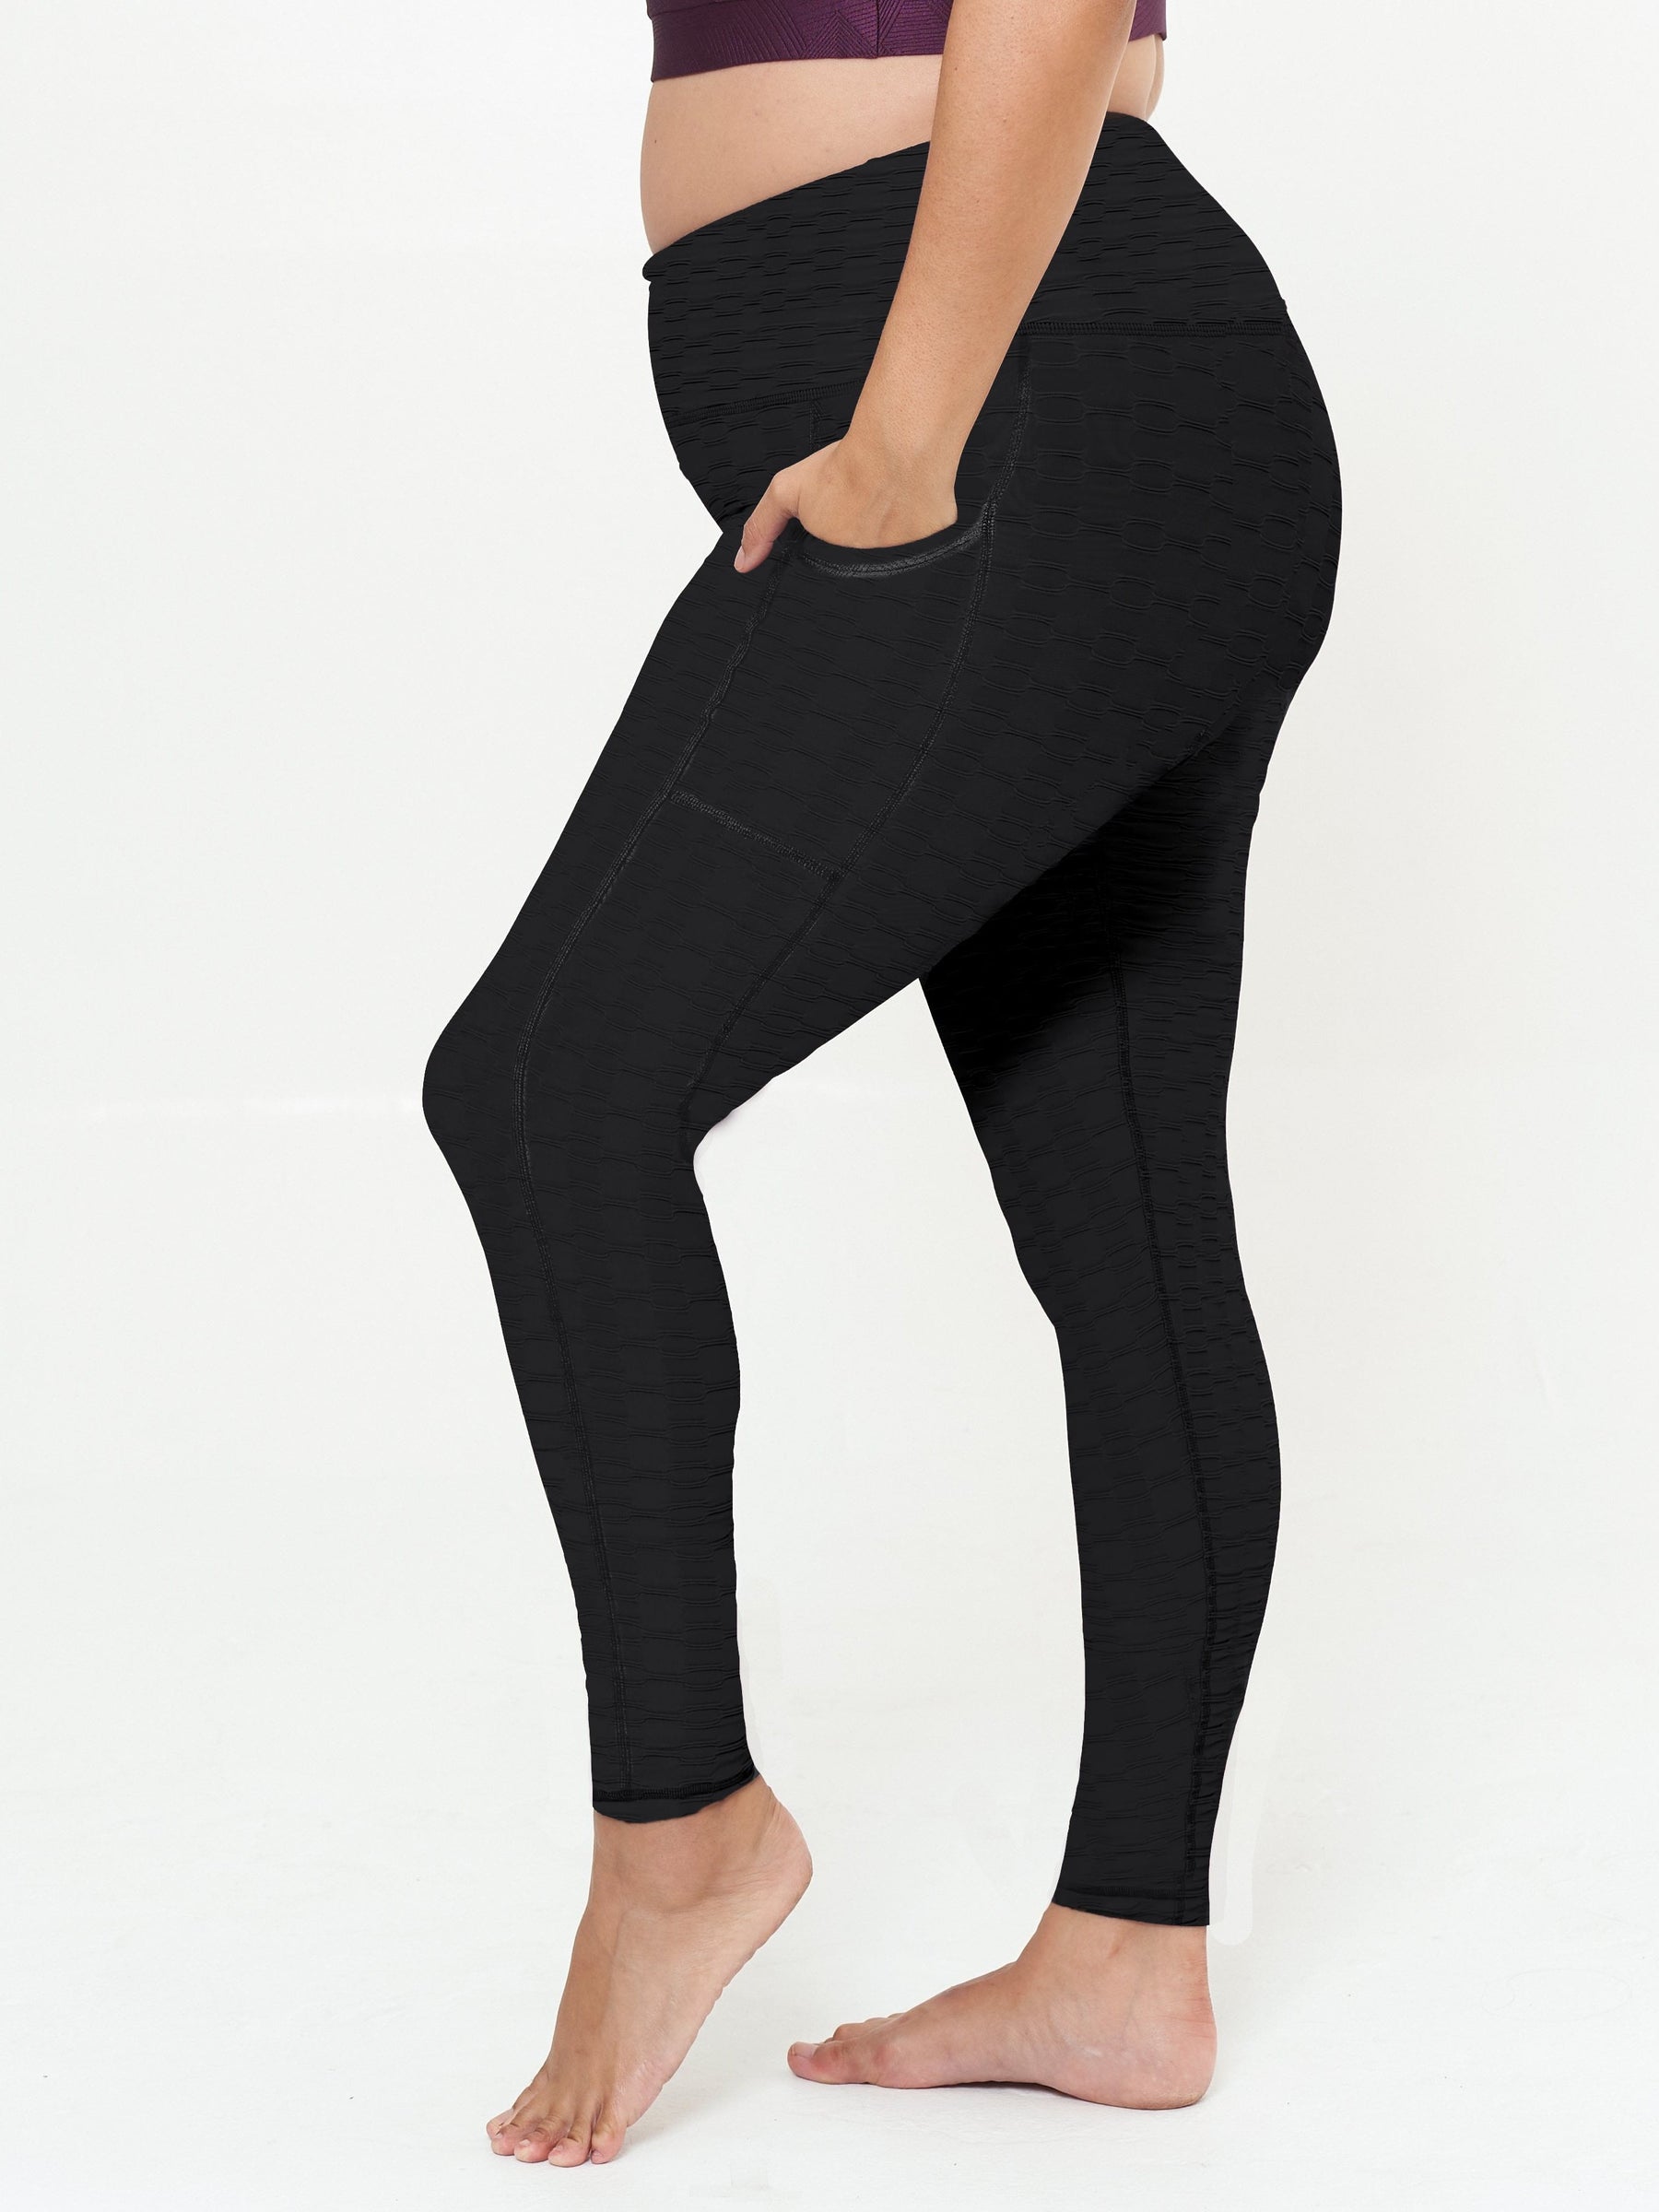 Black Compressive Leggings with Pockets That Don't Roll Down